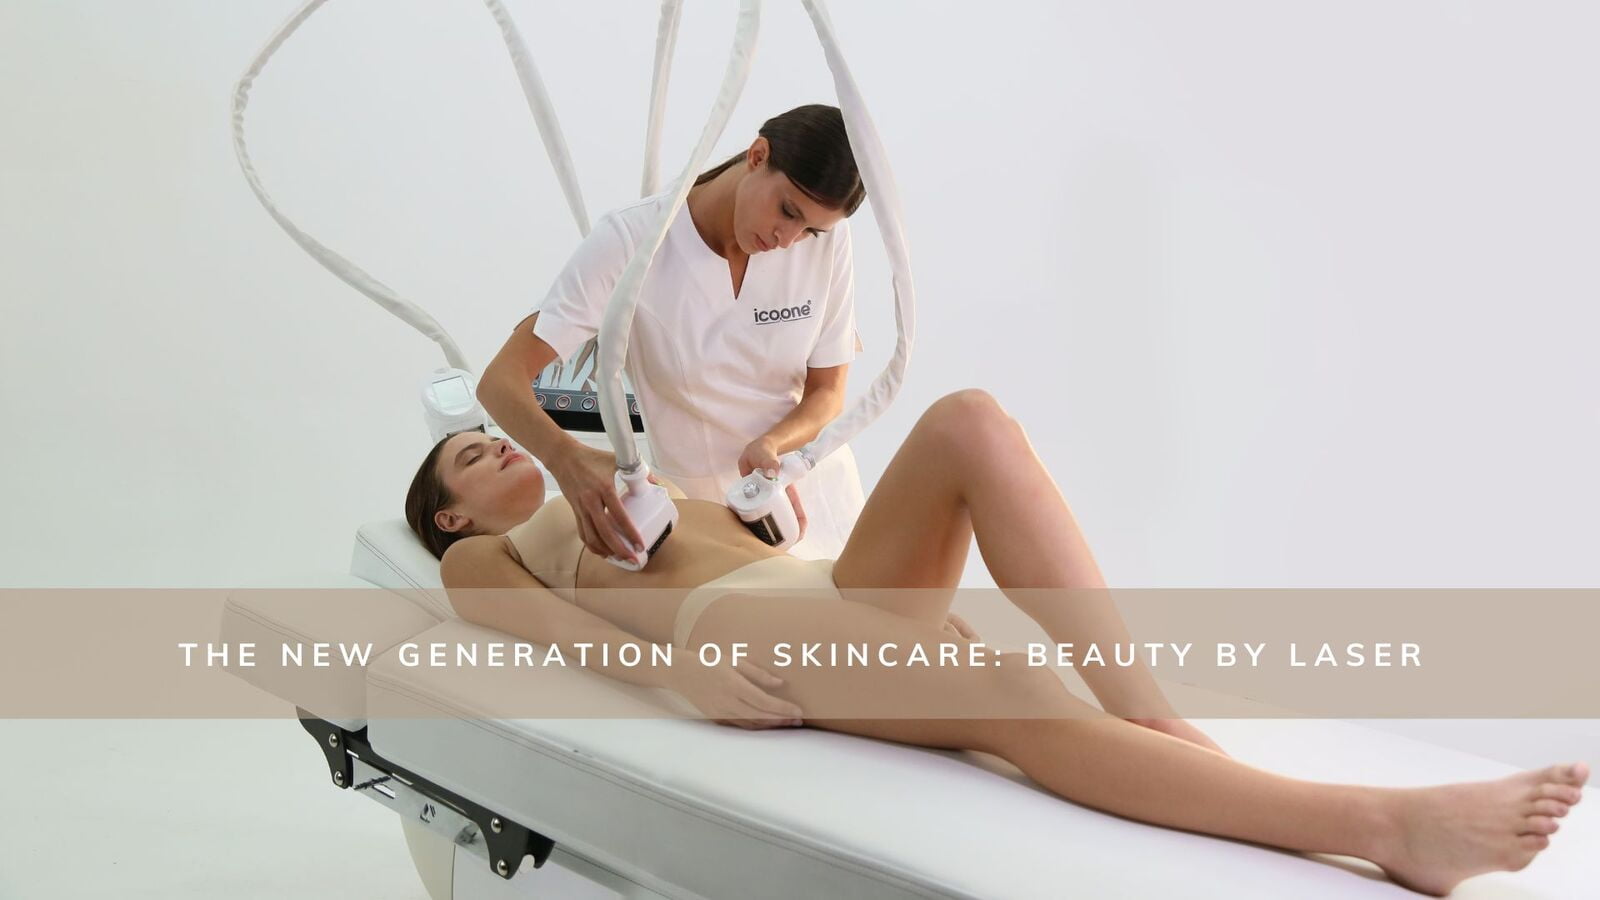 The new generation of skincare: beauty by laser